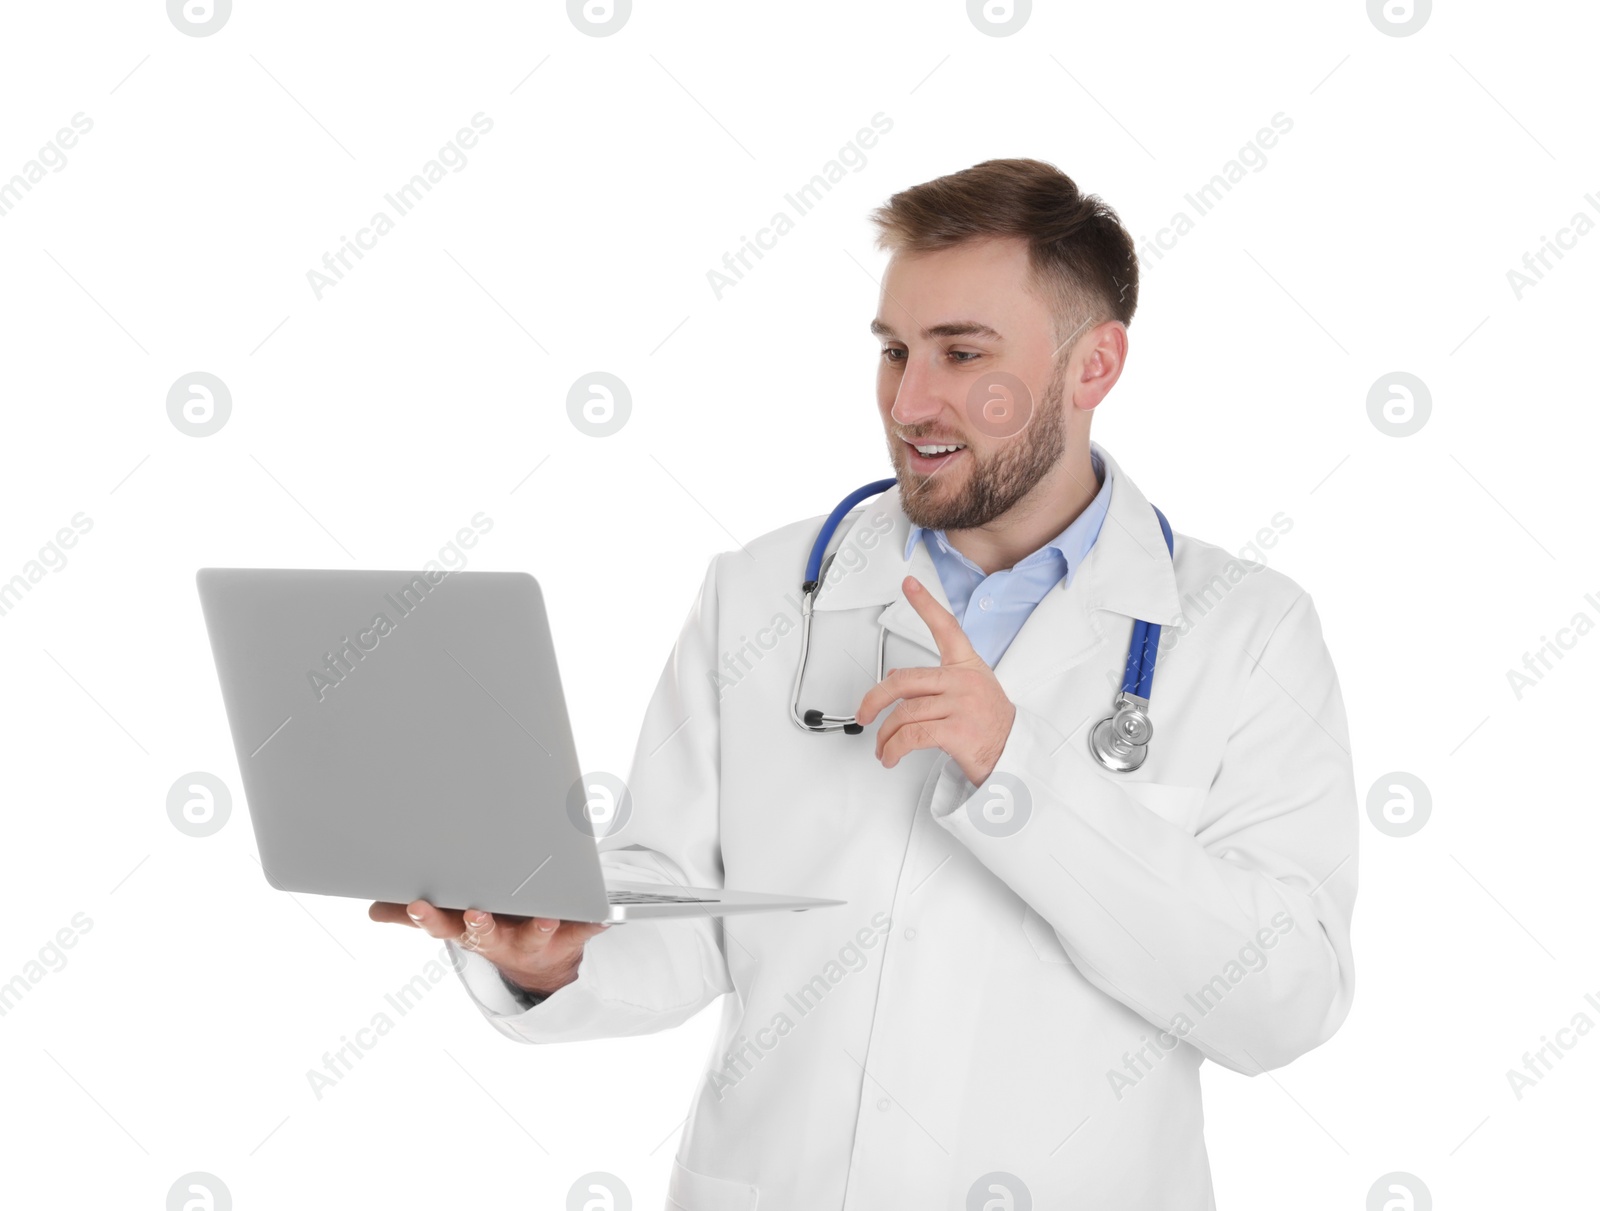 Photo of Male doctor using video chat on laptop against white background